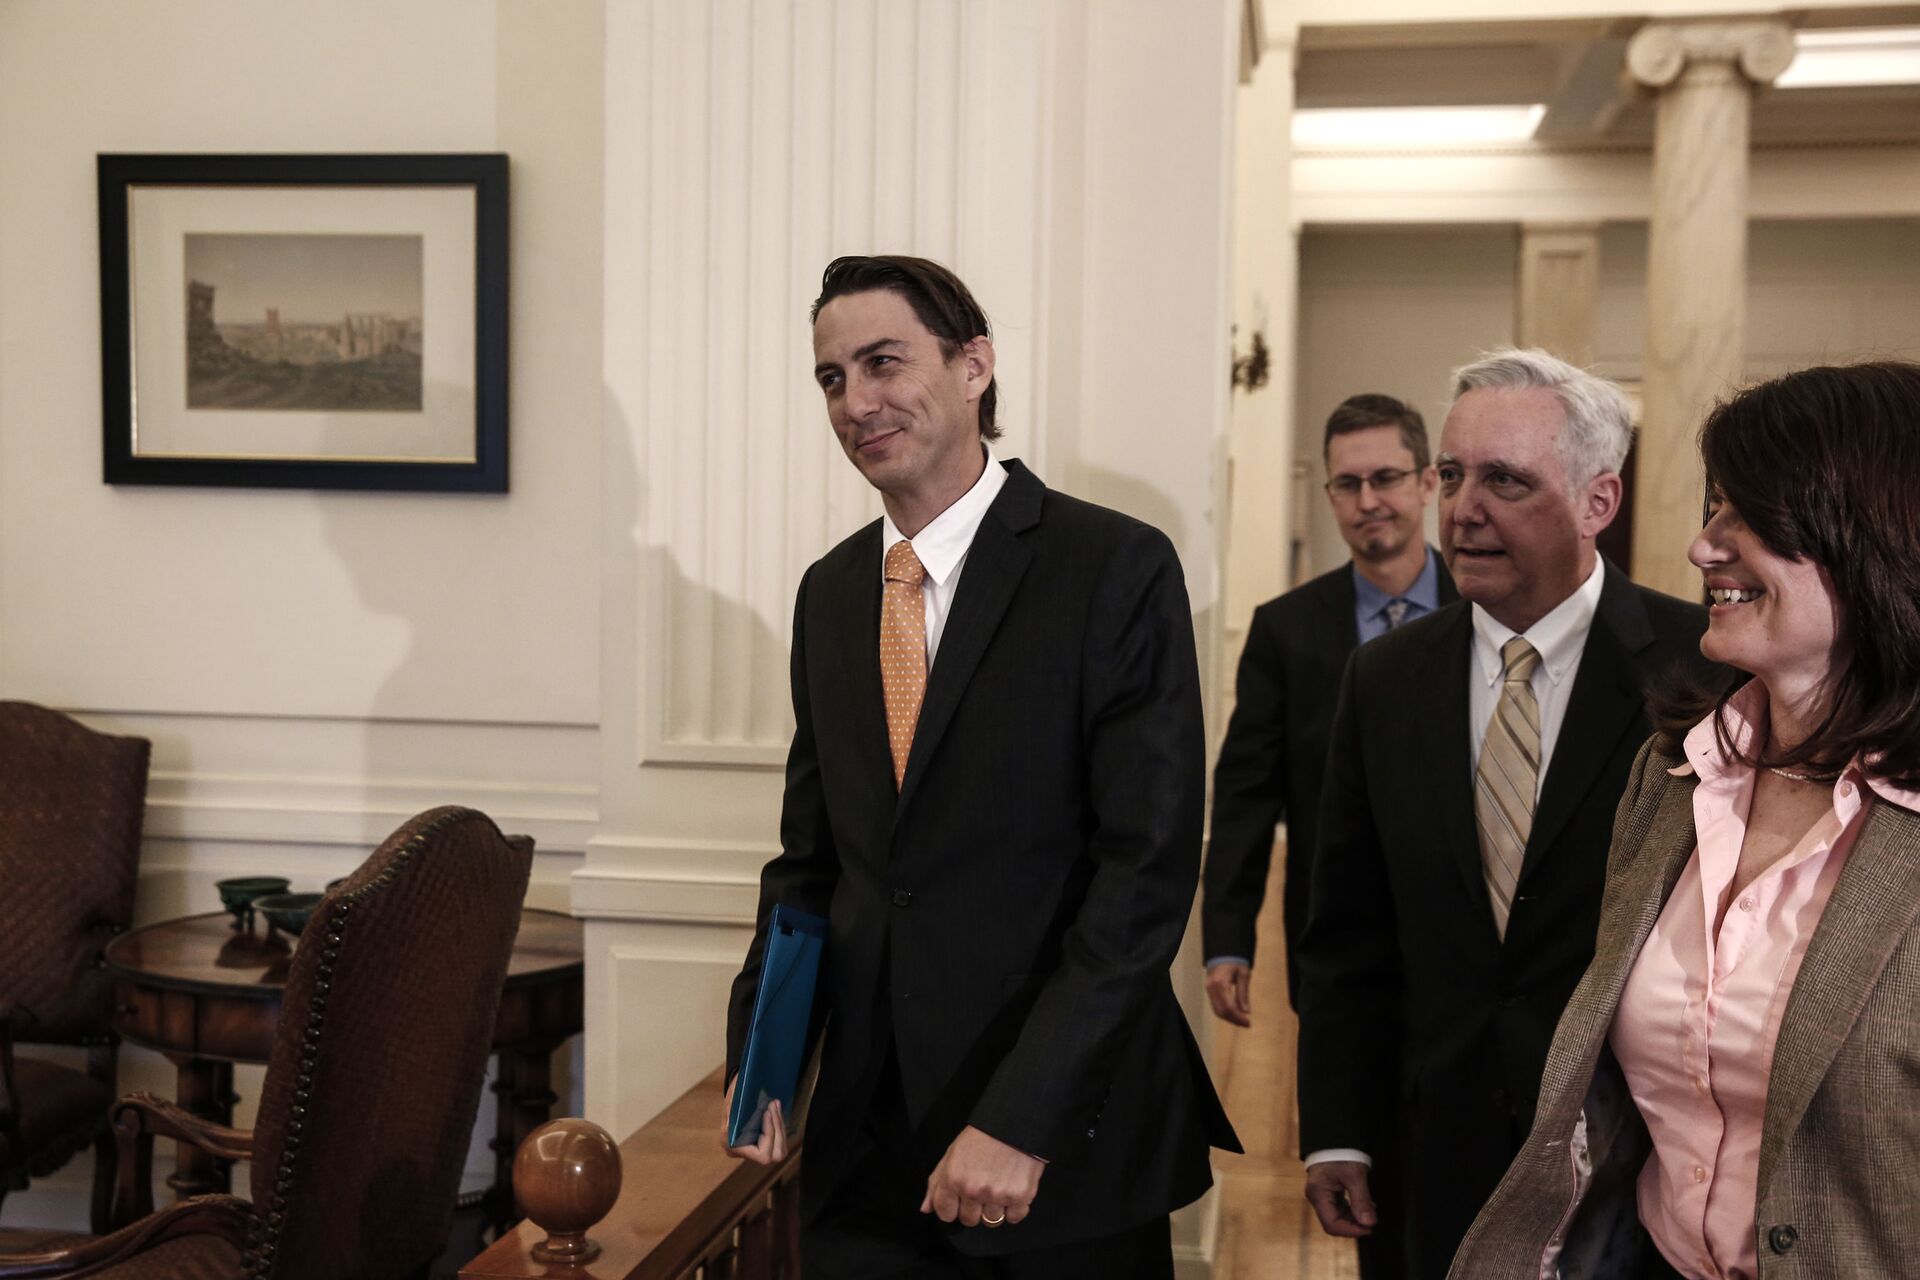 Amos Hochstein, centre, U.S. State Department Special Envoy for International Energy Affairs, is escorted by U.S. Ambassador to Athens David D. Pearce, second right, as they arrive for a meeting with Greek Foreign Minster Nikos Kotzias in Athens, Greece, on Friday, May 8, 2015 - Sputnik International, 1920, 07.09.2021